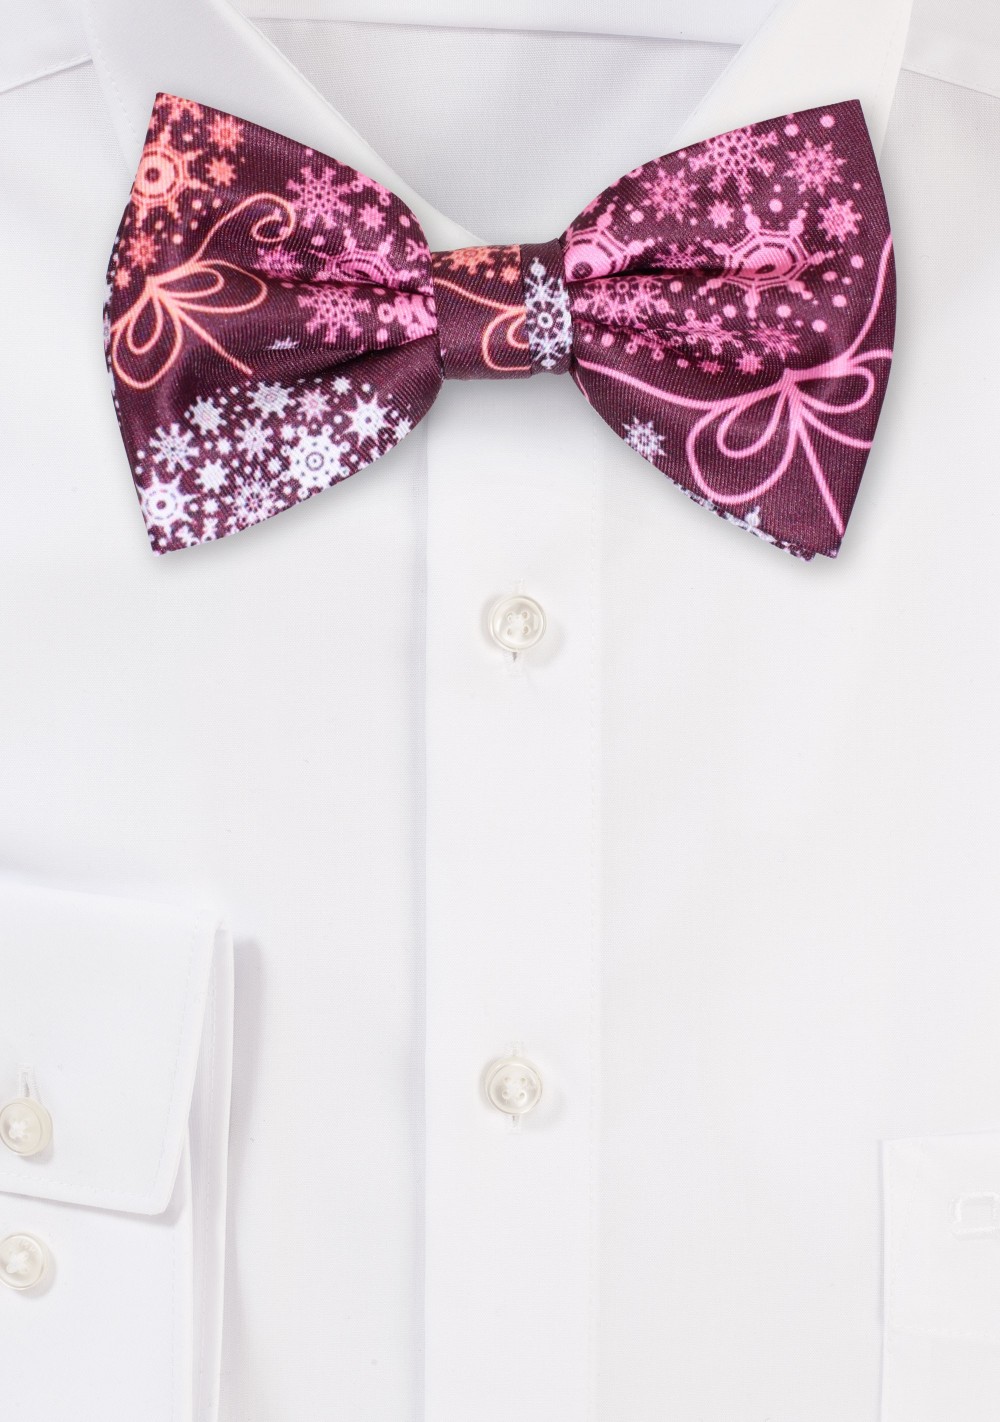 Wine Red Bowtie with Holiday Ornaments